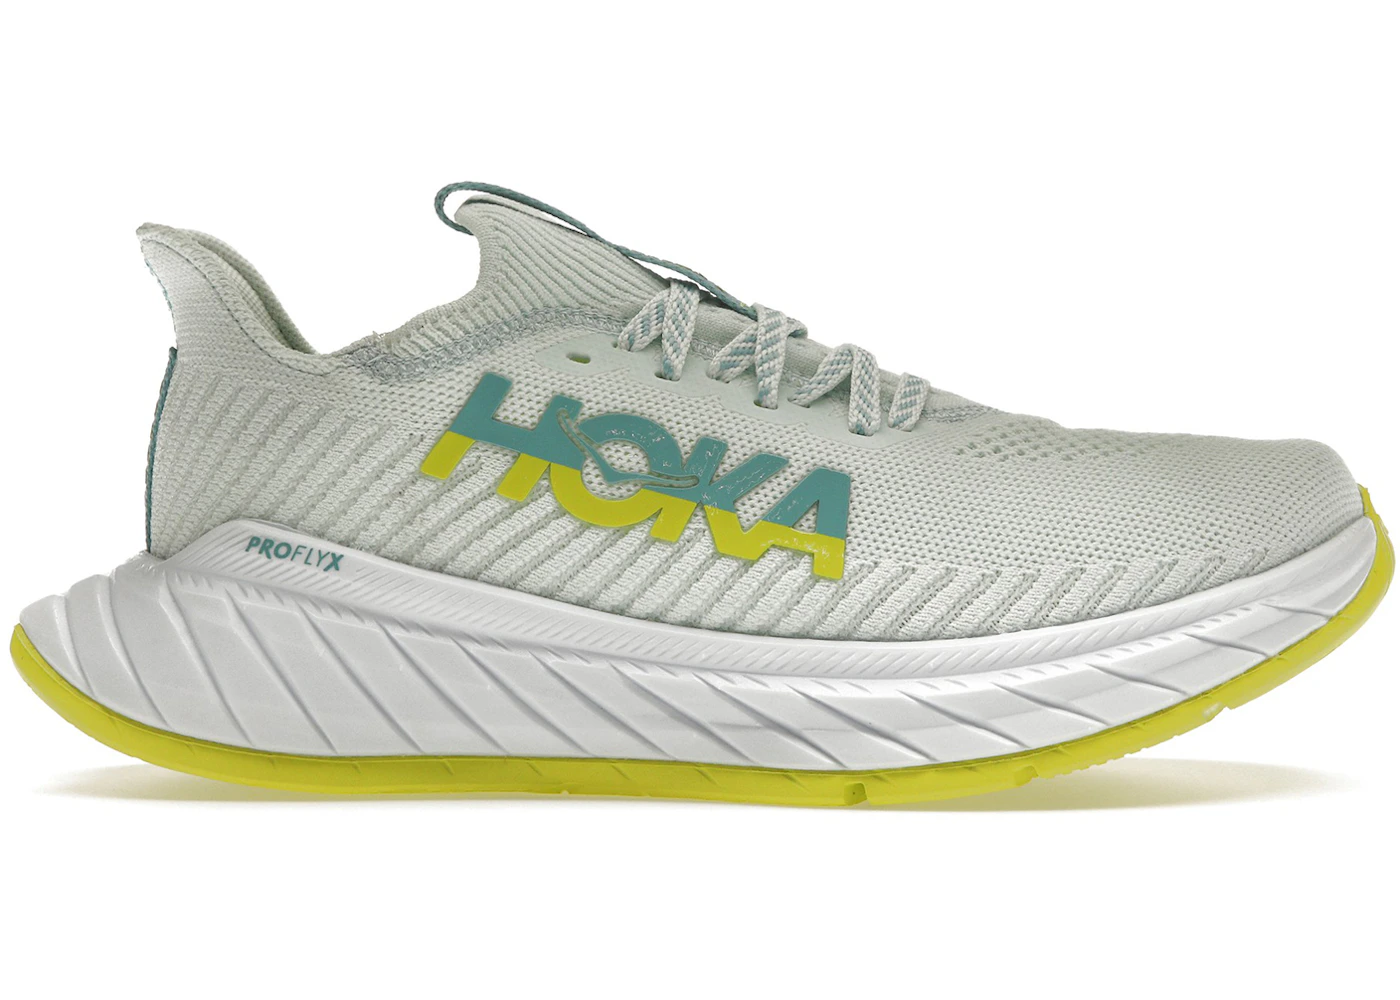 Hoka One One Carbon X 3 Billowing Sail (Women's) - 1123193-BSEP - US